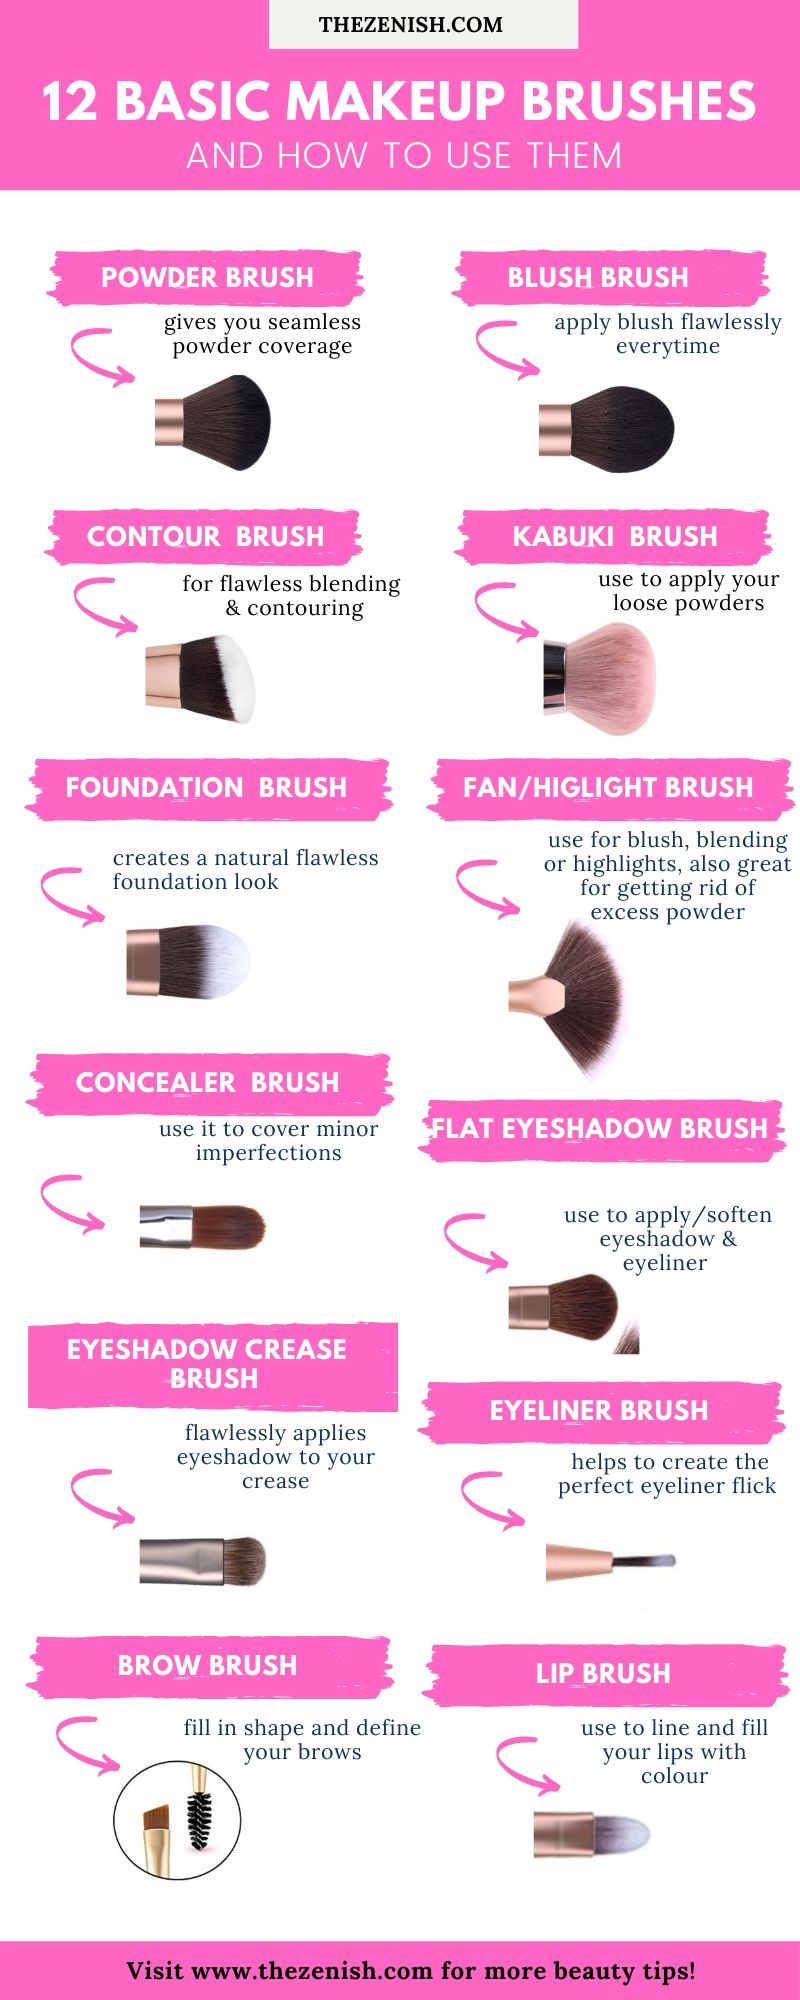 Basic makeup brushes and their uses